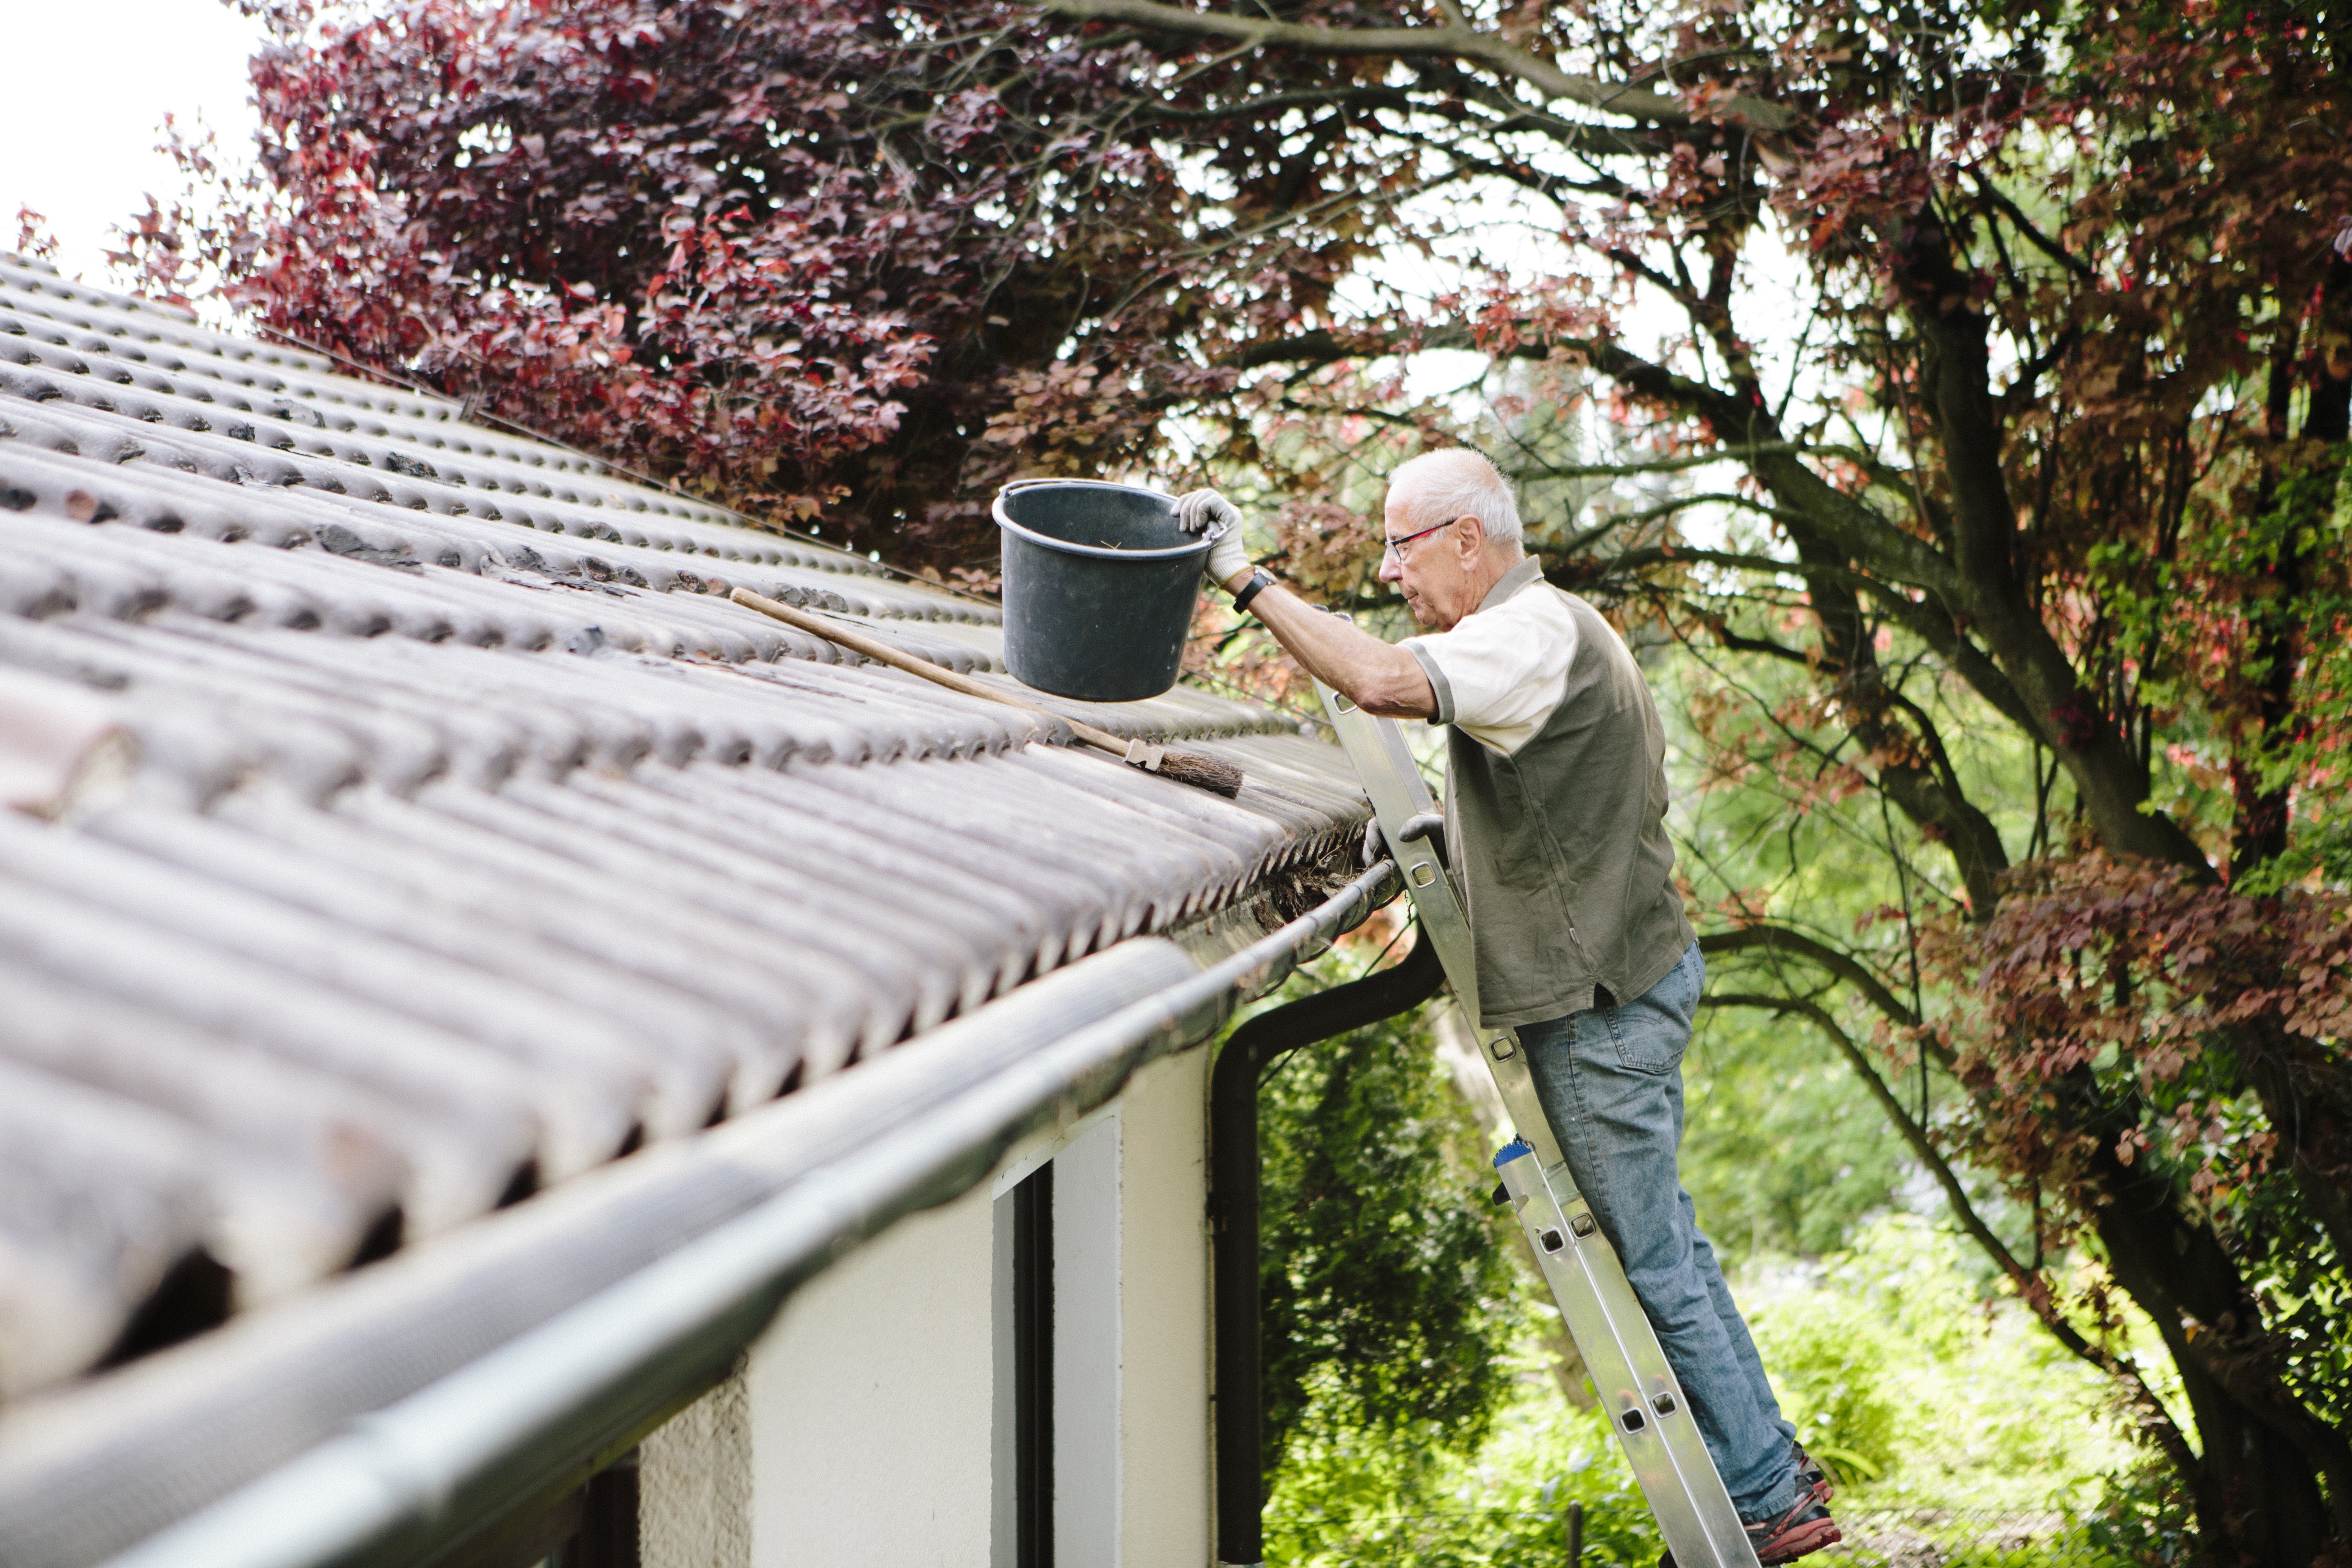 Gutter Cleaning in Sewickley PA